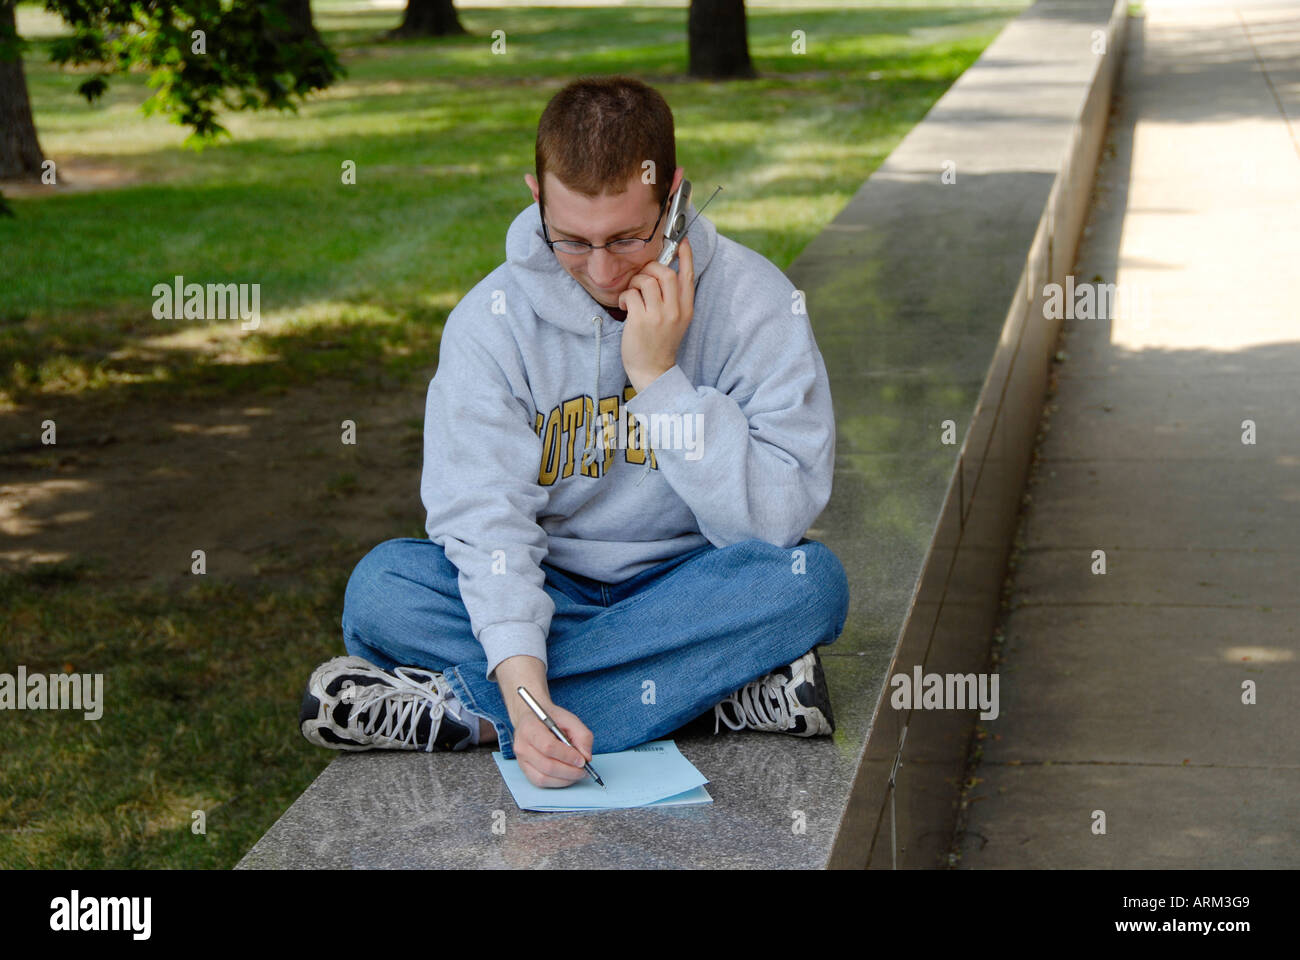 Student activities at the University of Notre Dame campus at South Bend Indiana IN Stock Photo